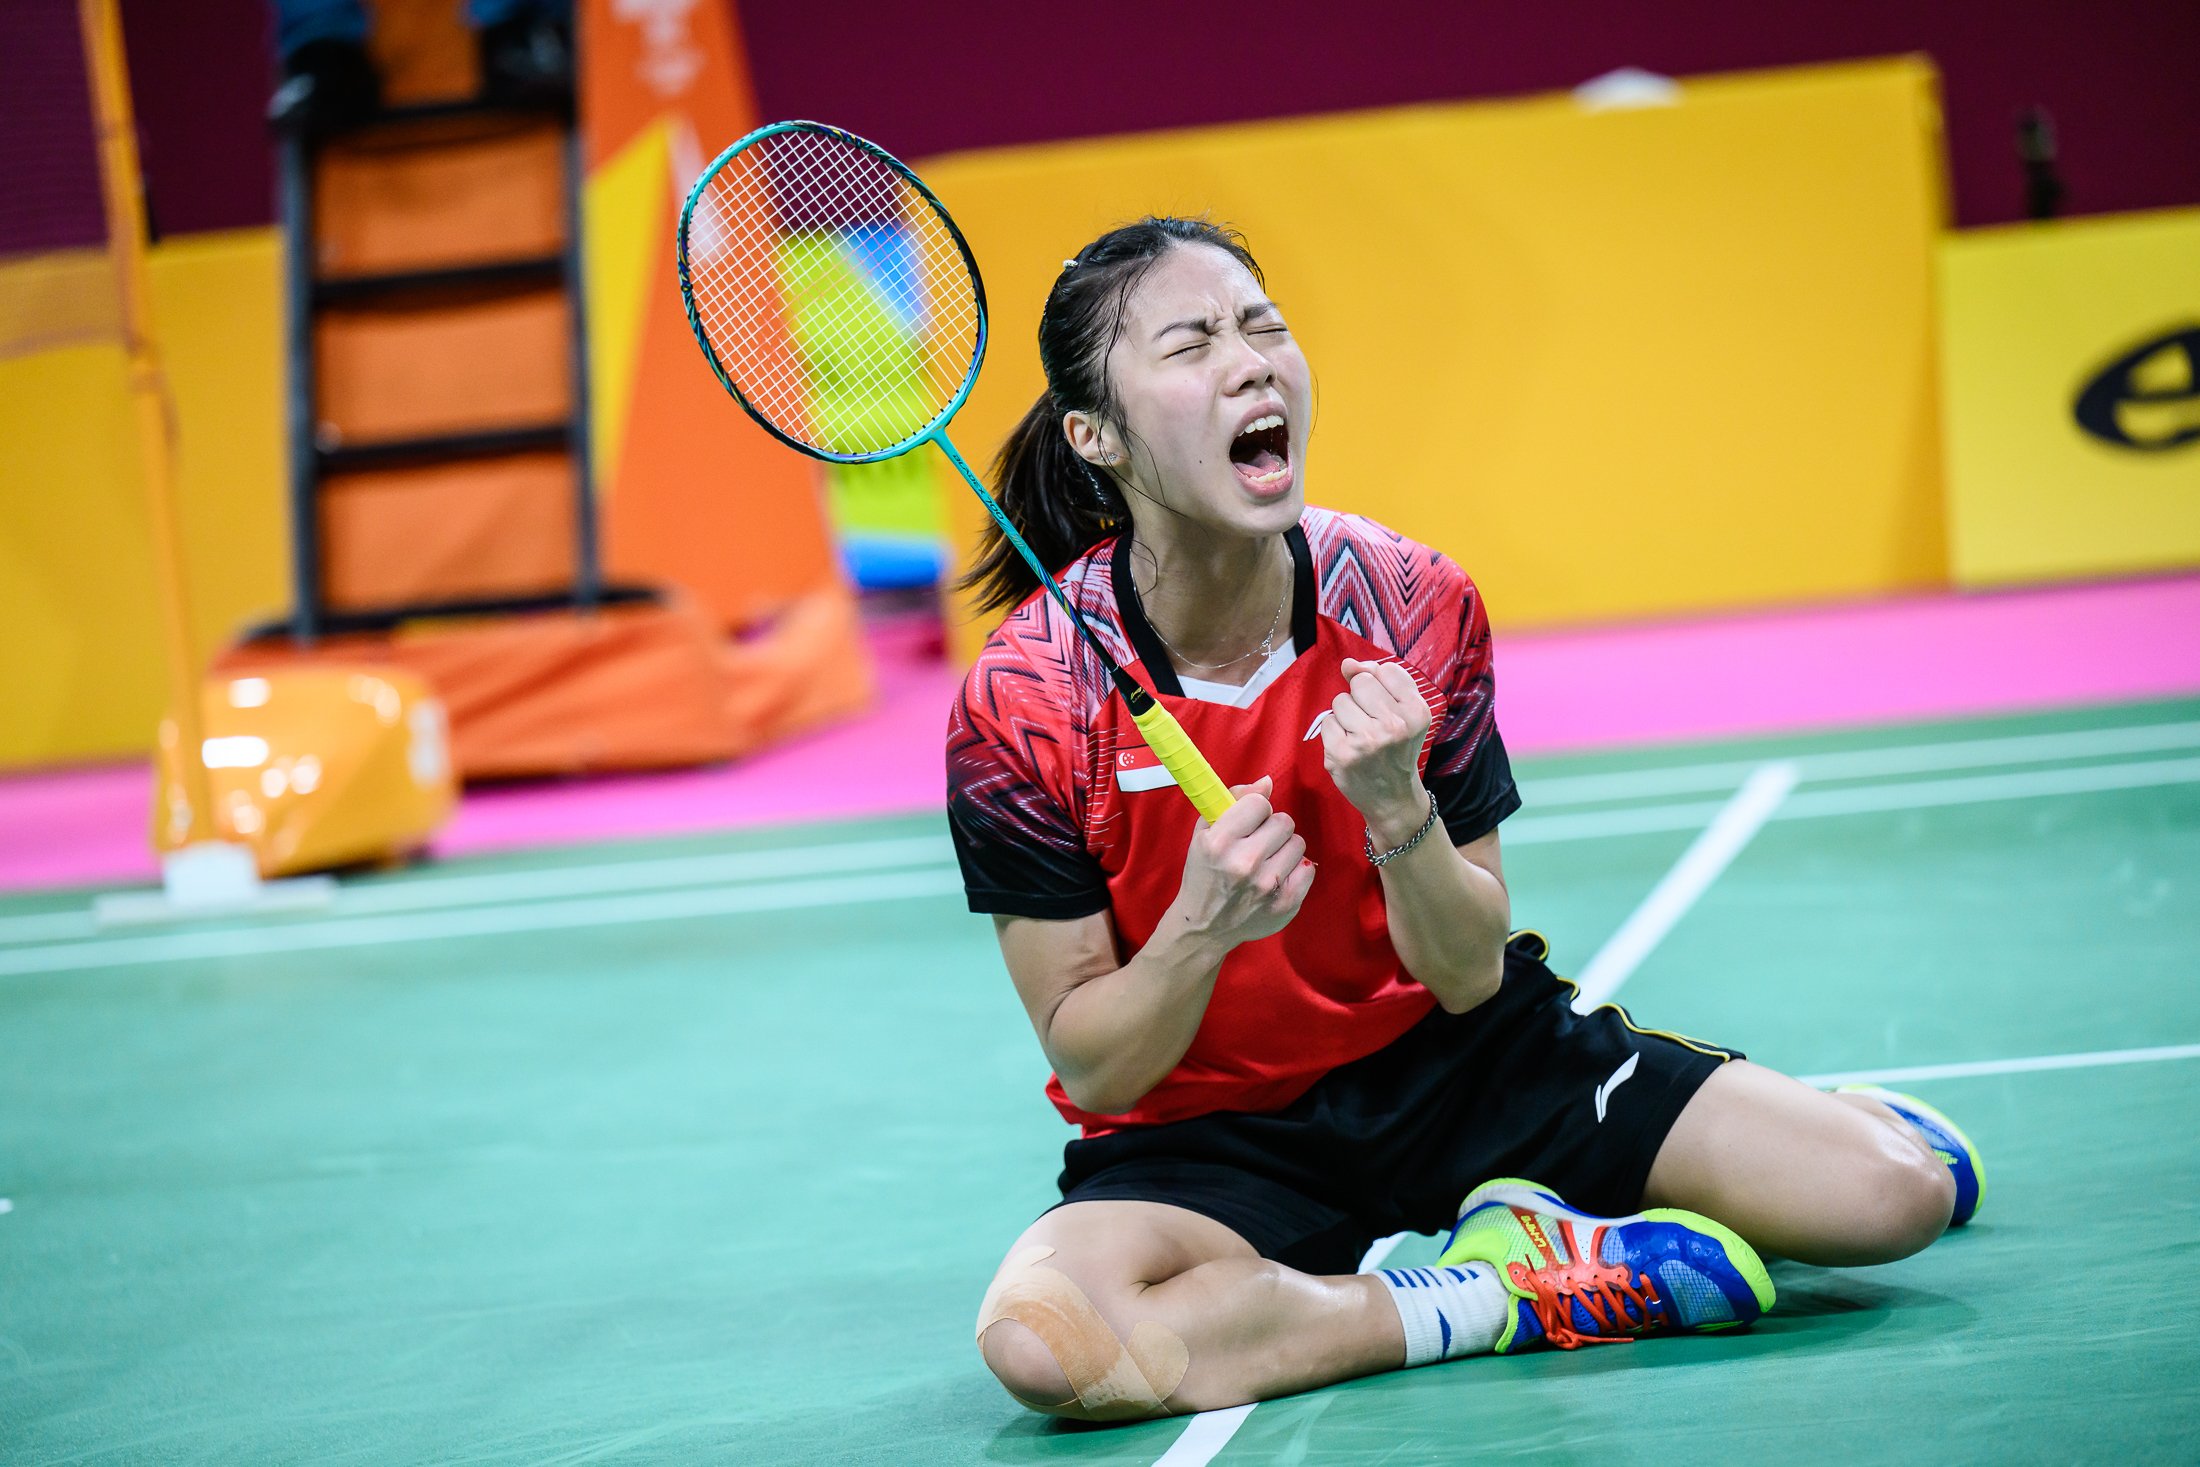 20220807_-_Badminton Photo by Andy Chua_081